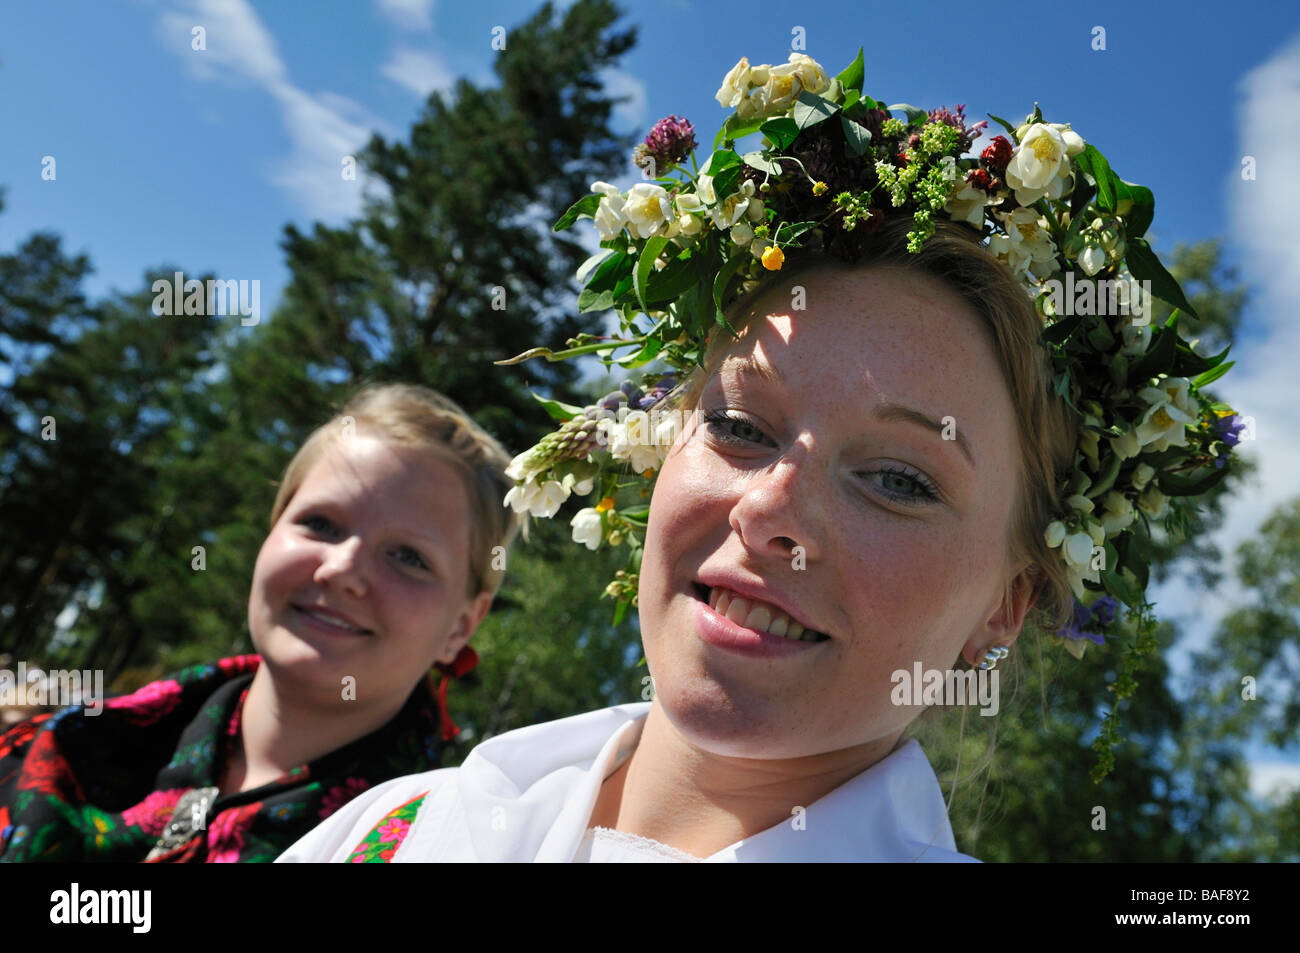 Smiling women with floral wreath at Midsummer celebration in Doessberget Sweden June 2008 Stock Photo